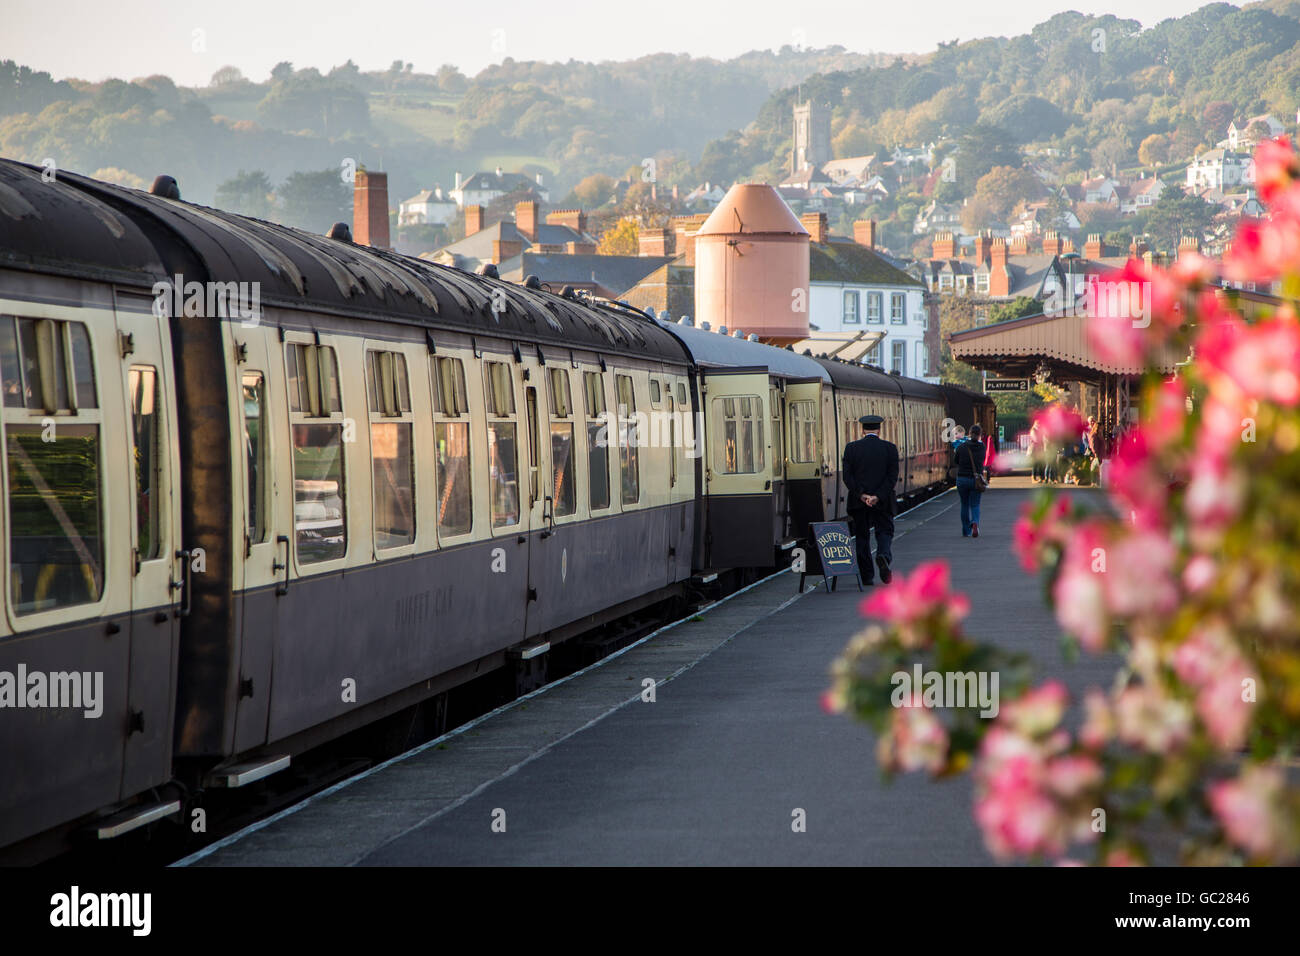 Train carriages on the platform at Minehead Station, Somerset UK Stock Photo